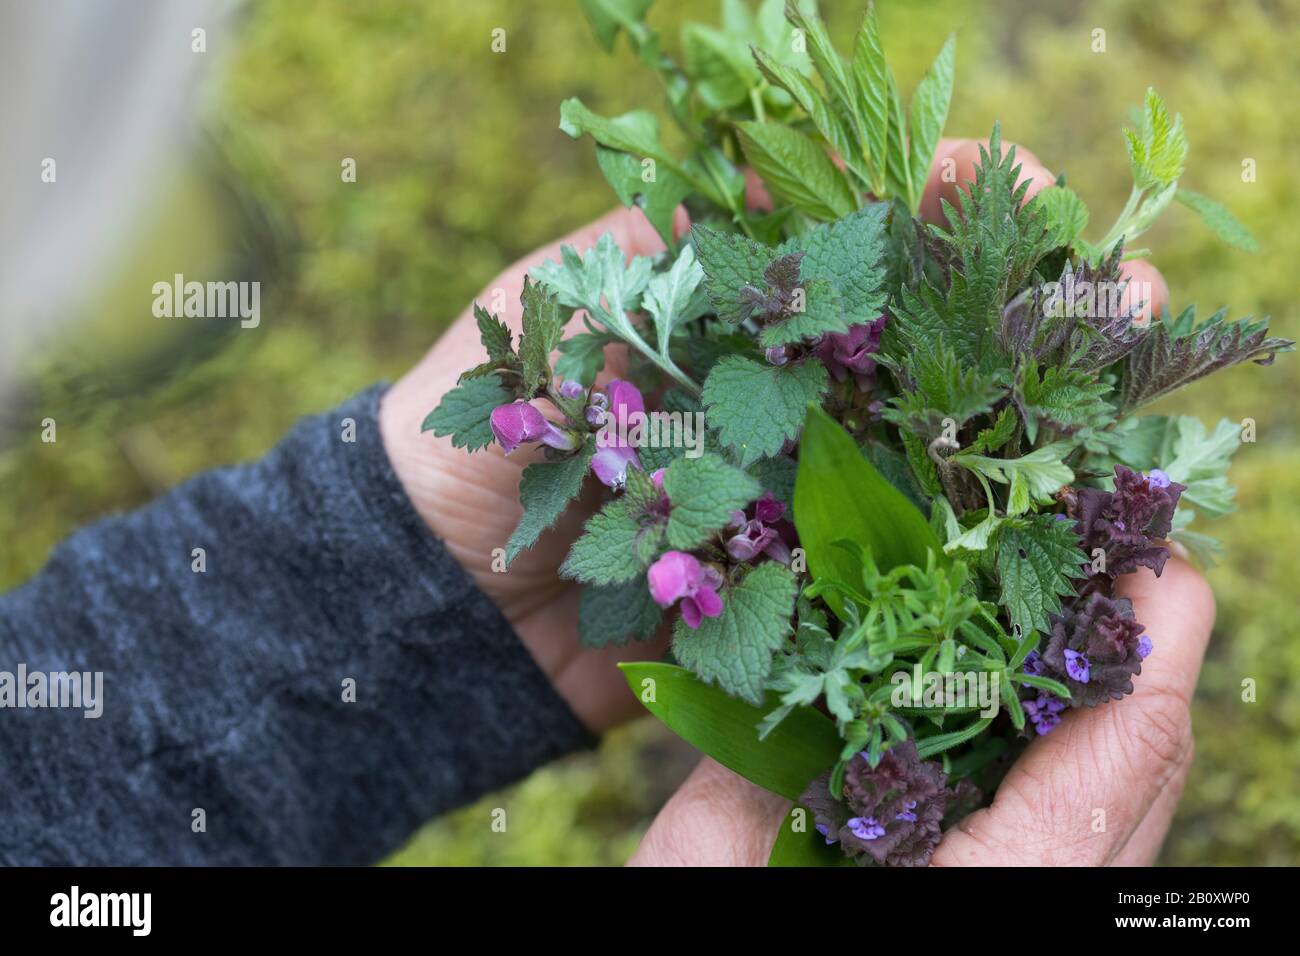 wild vegetable in sprig, collected herbs, Germany Stock Photo